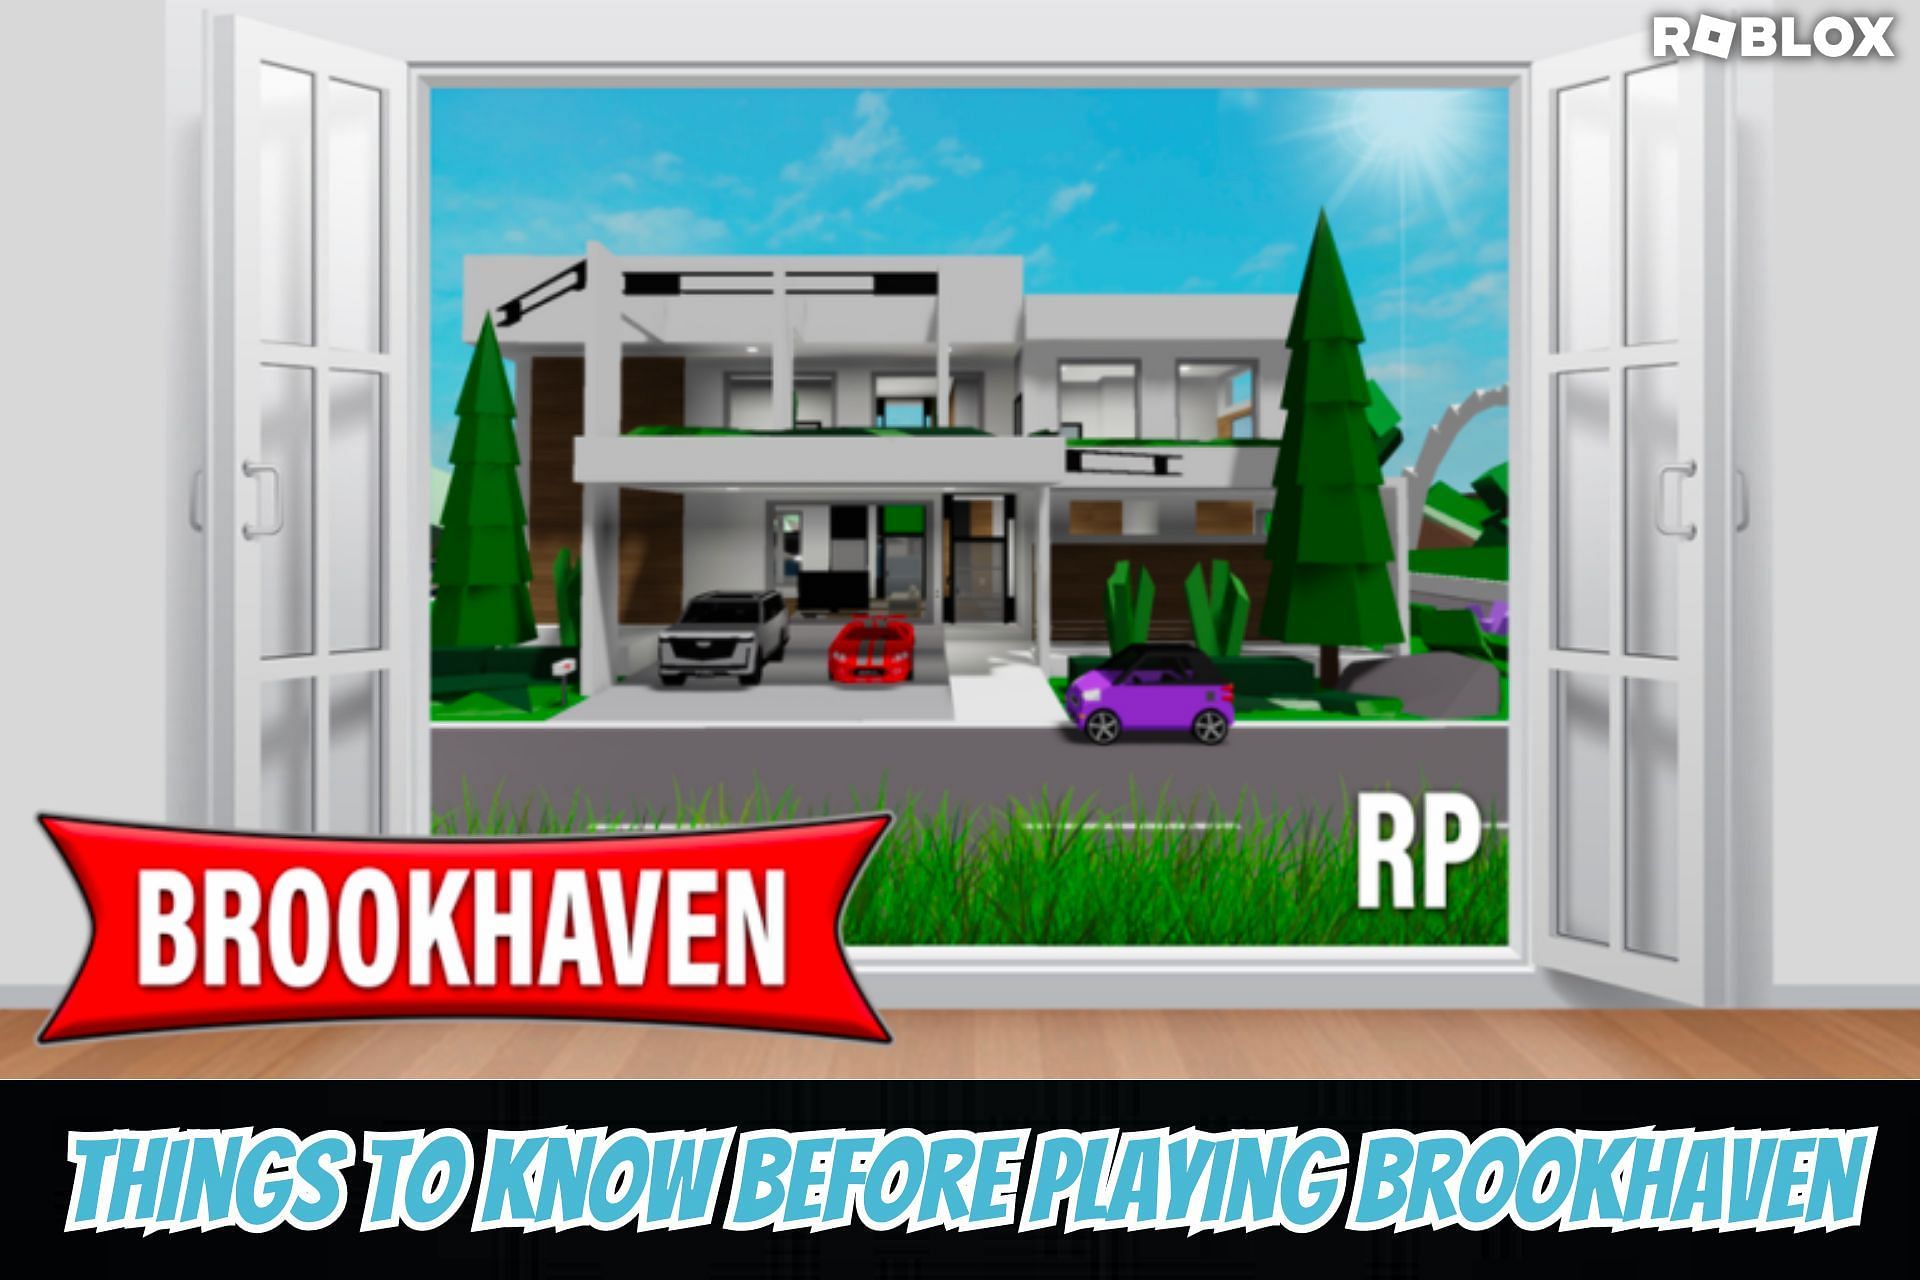 ROBLOX I WANT TO PLAY BROOKHAVEN. BUT I CAN'T BECAUSE IT TELLS ME THA